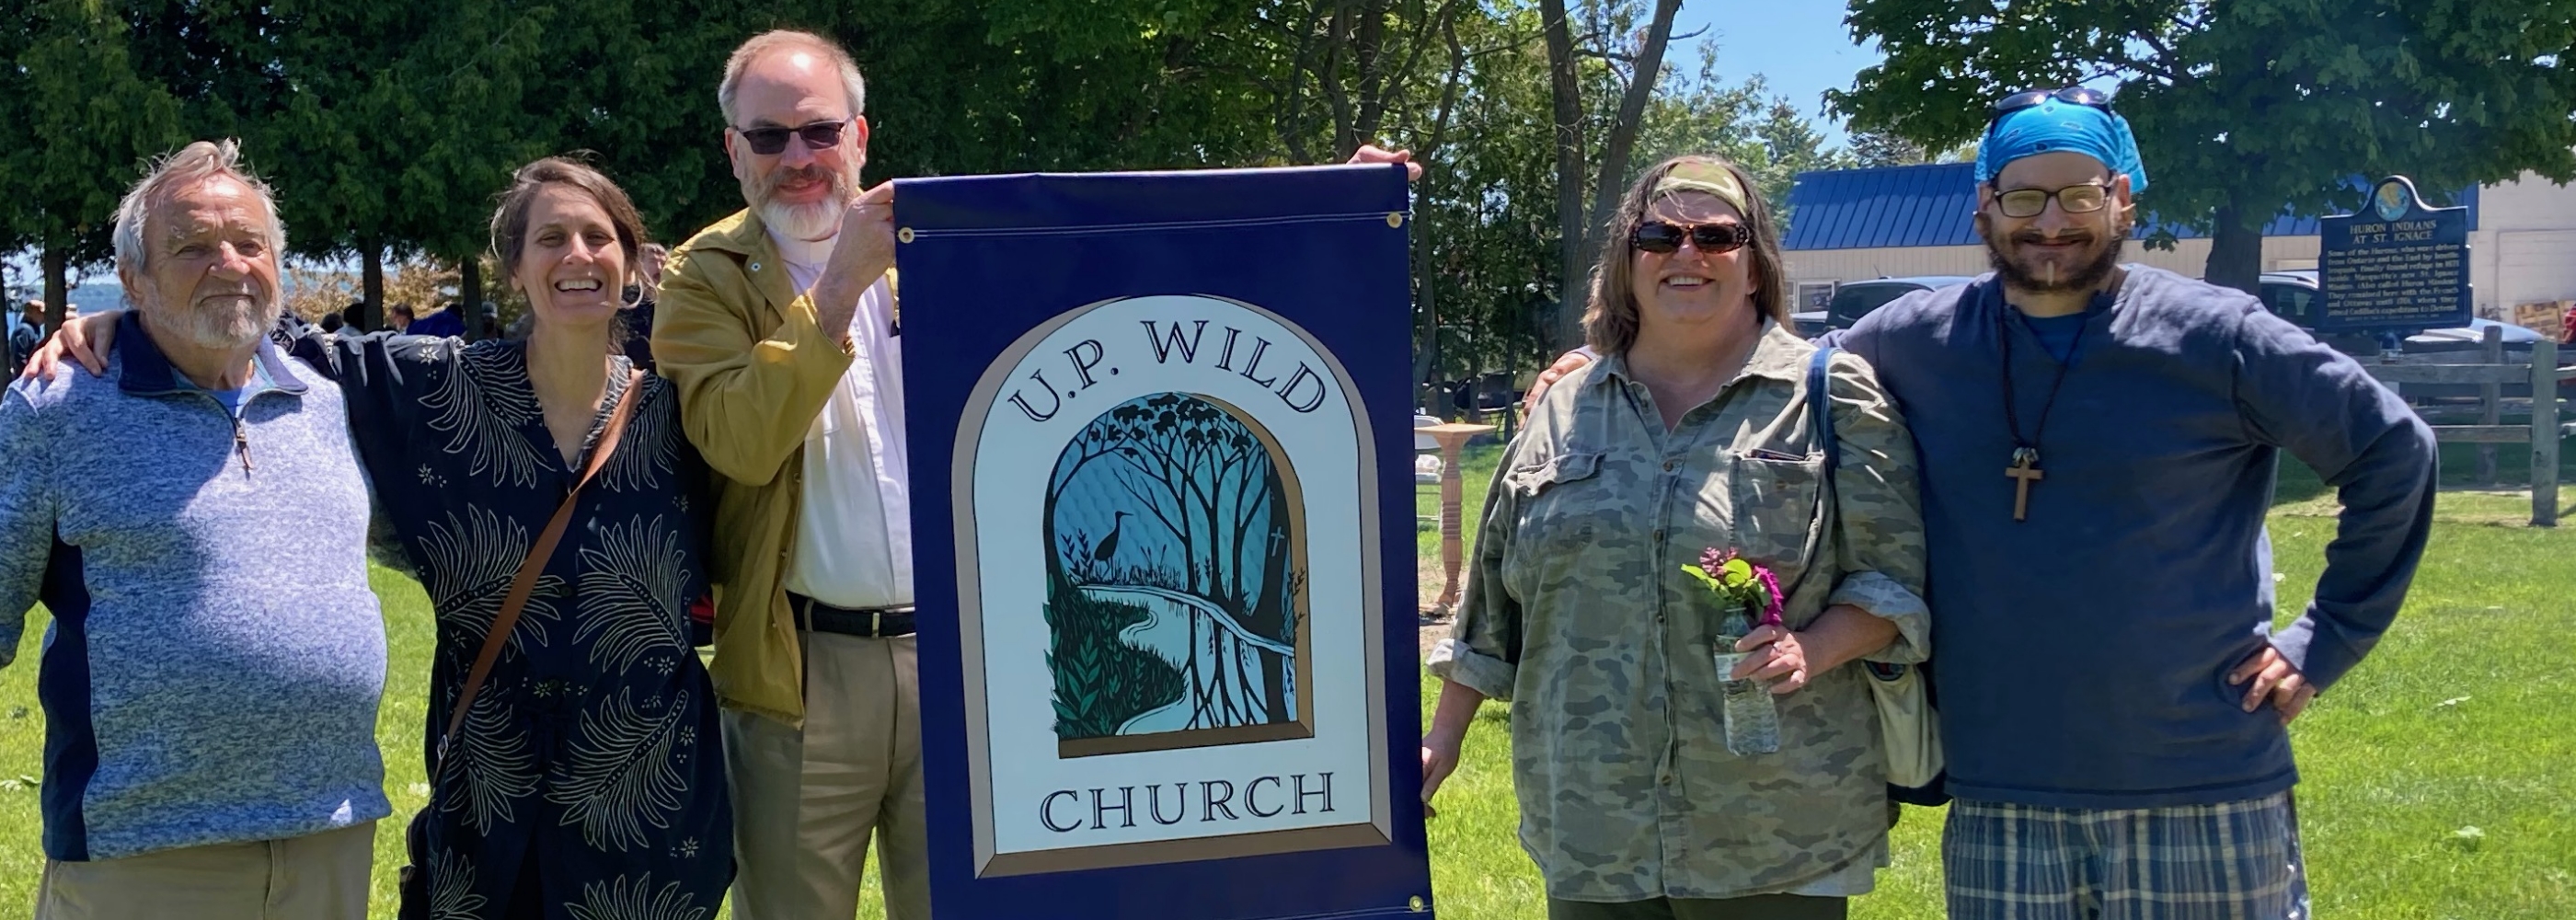 Group of people holding up an Up Wild Church banner